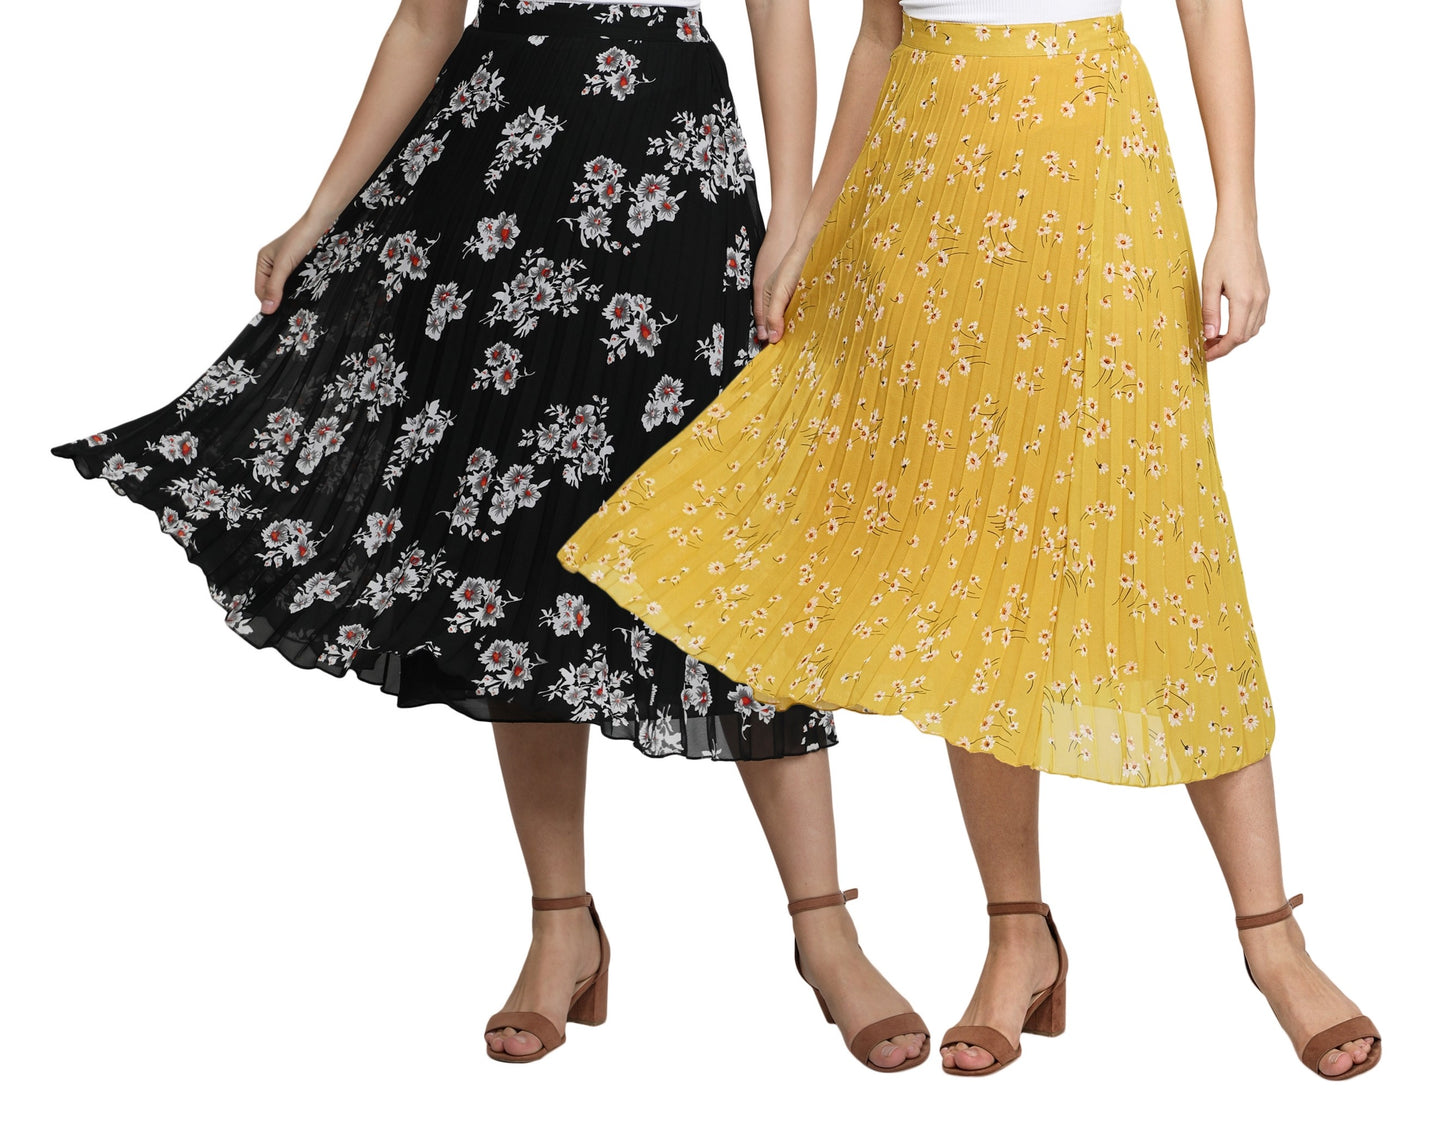 NUEVOSDAMAS Women Georgette Floral Printed Skirts - Pack of Two - Yellow and Black